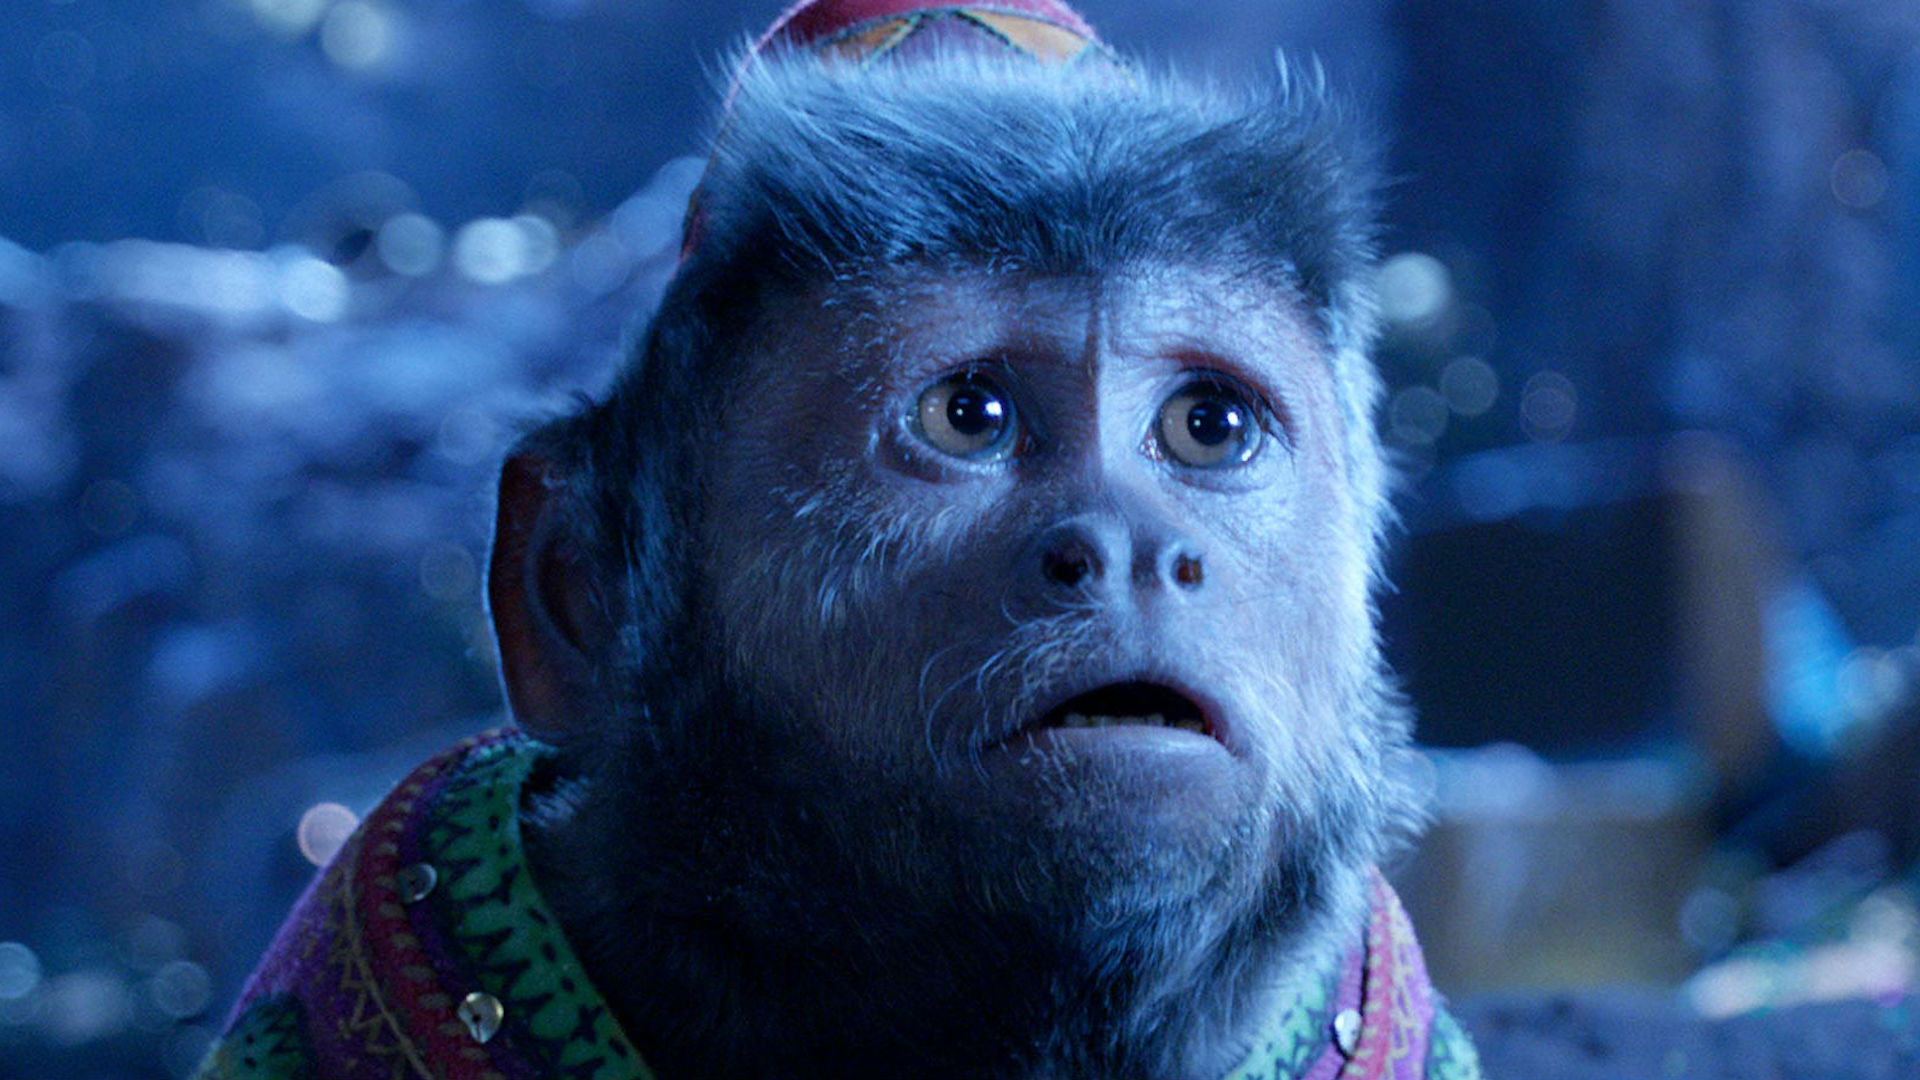 The monkey from the 2019 version of Aladdin